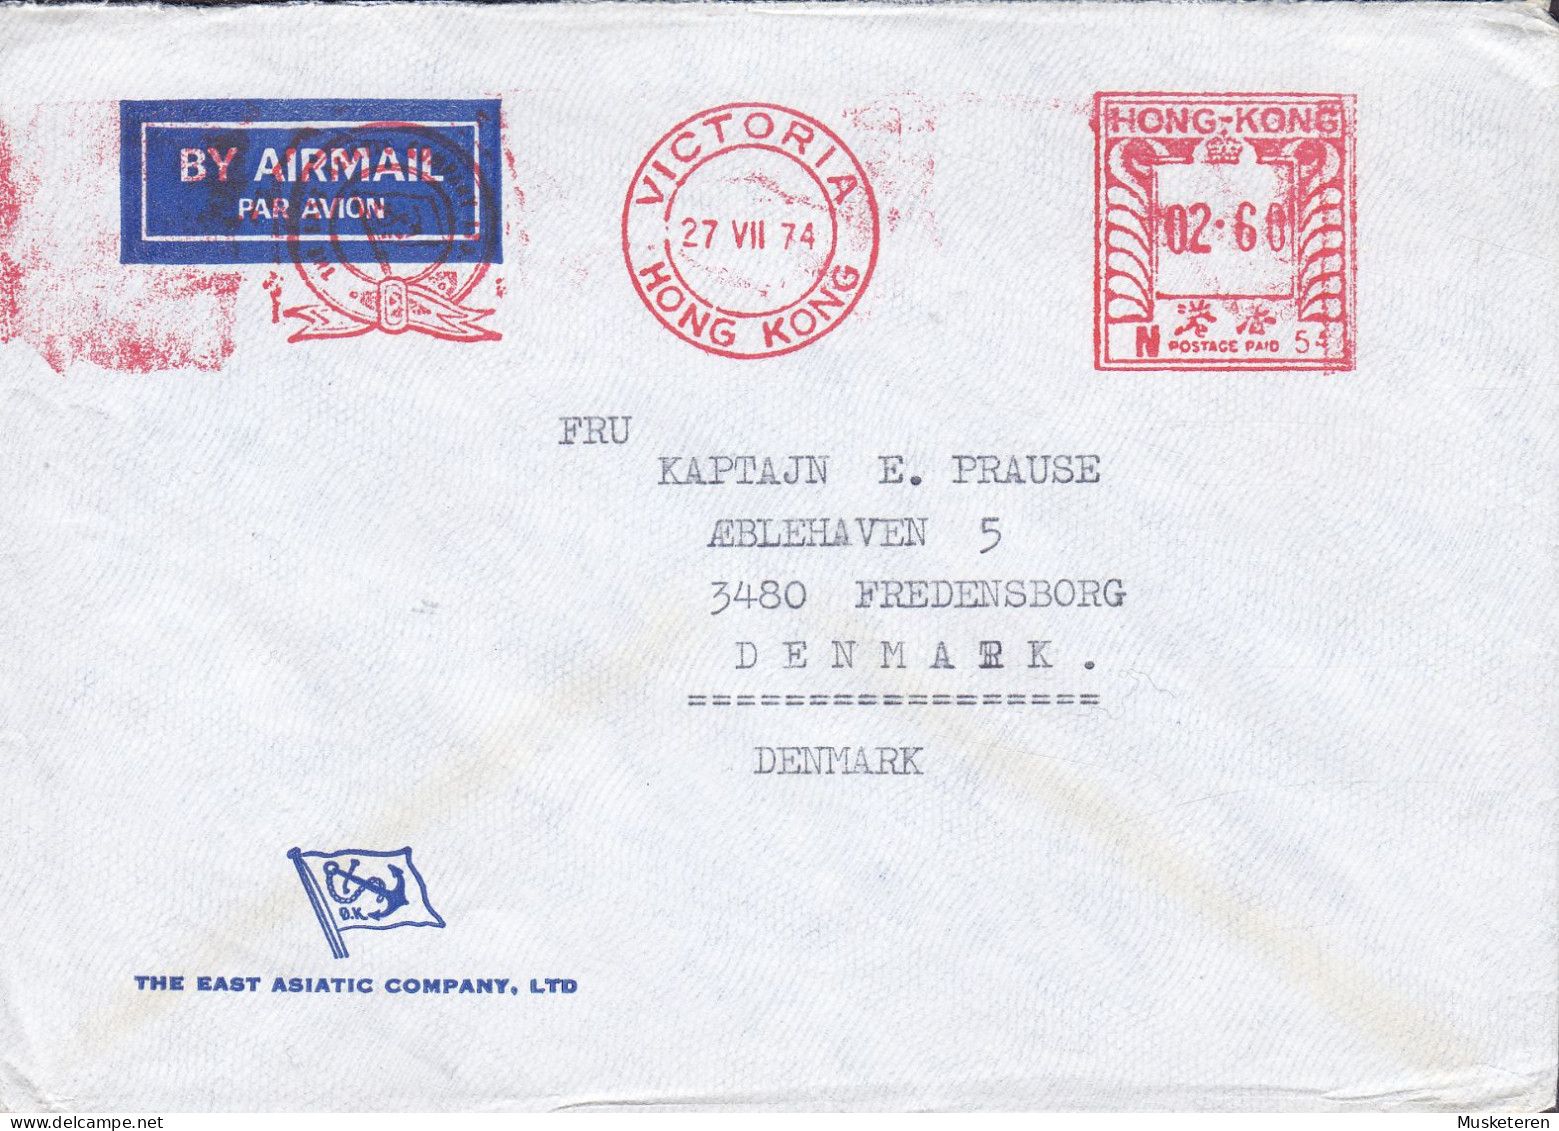 Hong Kong Captain M/S 'JUTLANDIA' THE EAST ASIATIC COMPANY, VICTORIA 1974 Meter Ships Mail Cover FREDENSBORG Denmark - Lettres & Documents